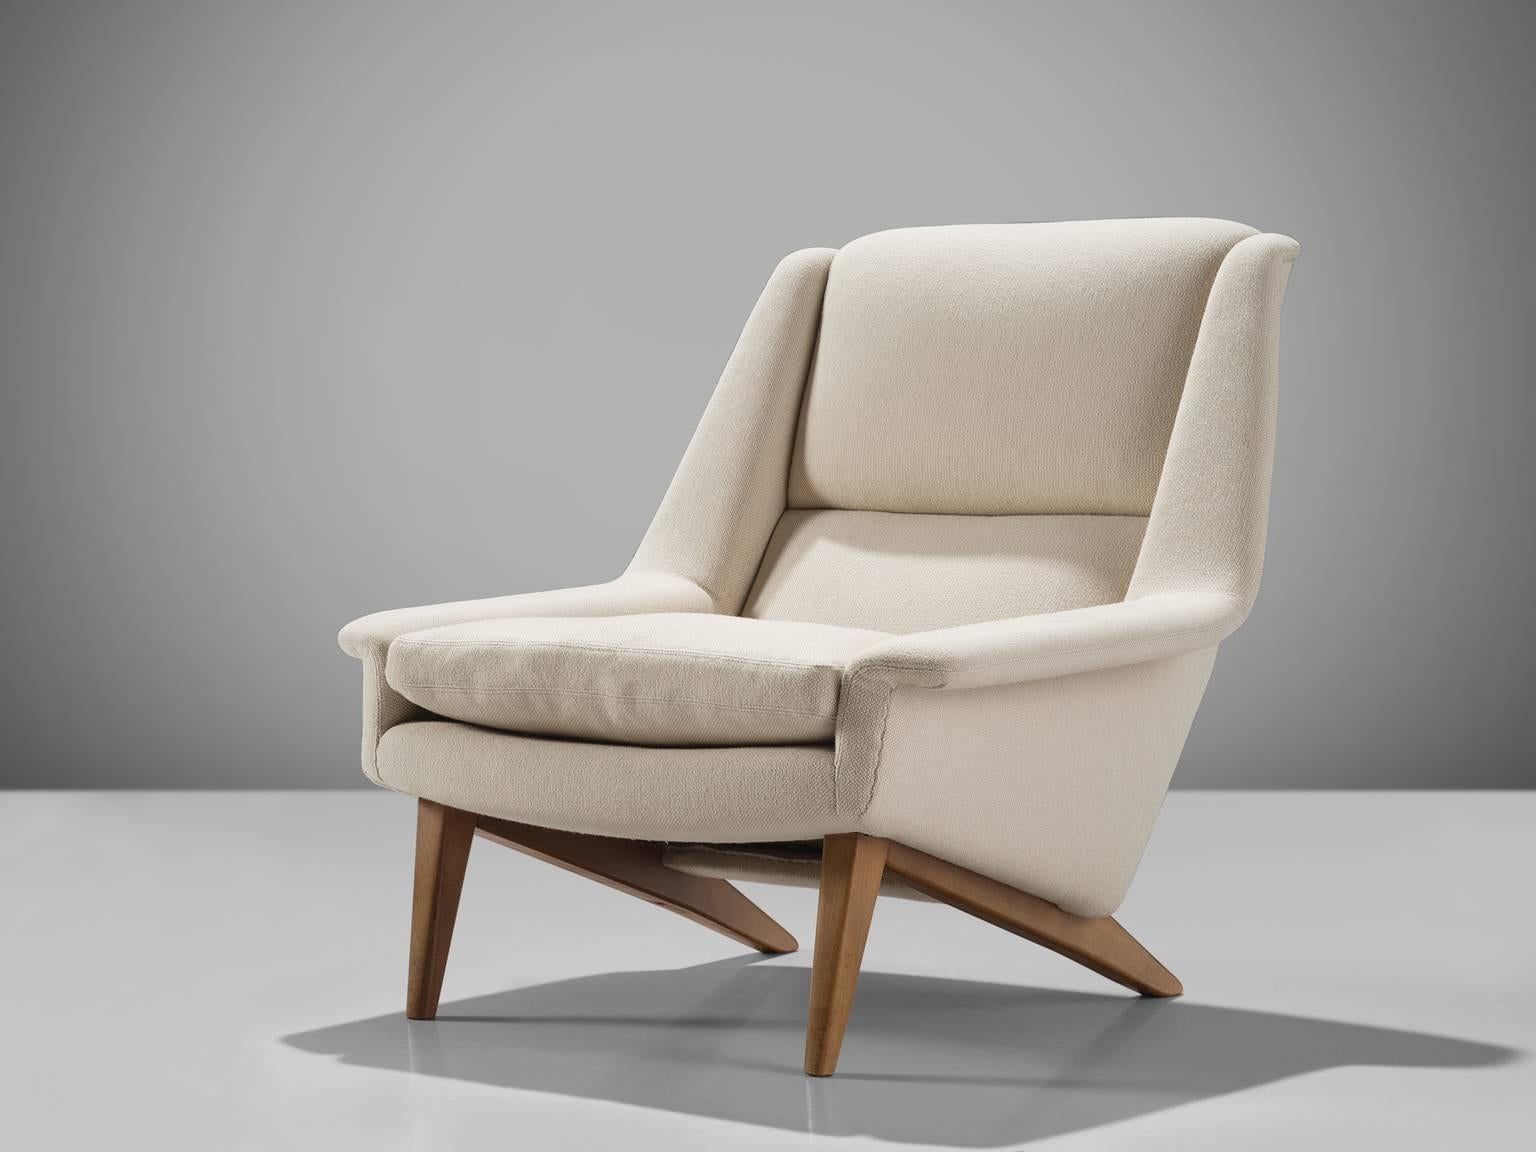 Folke Ohlsson for Fritz Hansen, lounge chair model 4410, in white fabric and teak, by Denmark, before 1957. 

This chair by Fritz Hansen, high quality lounge chair is made to reach an ultimate level of comfort as can clearly be recognized in the